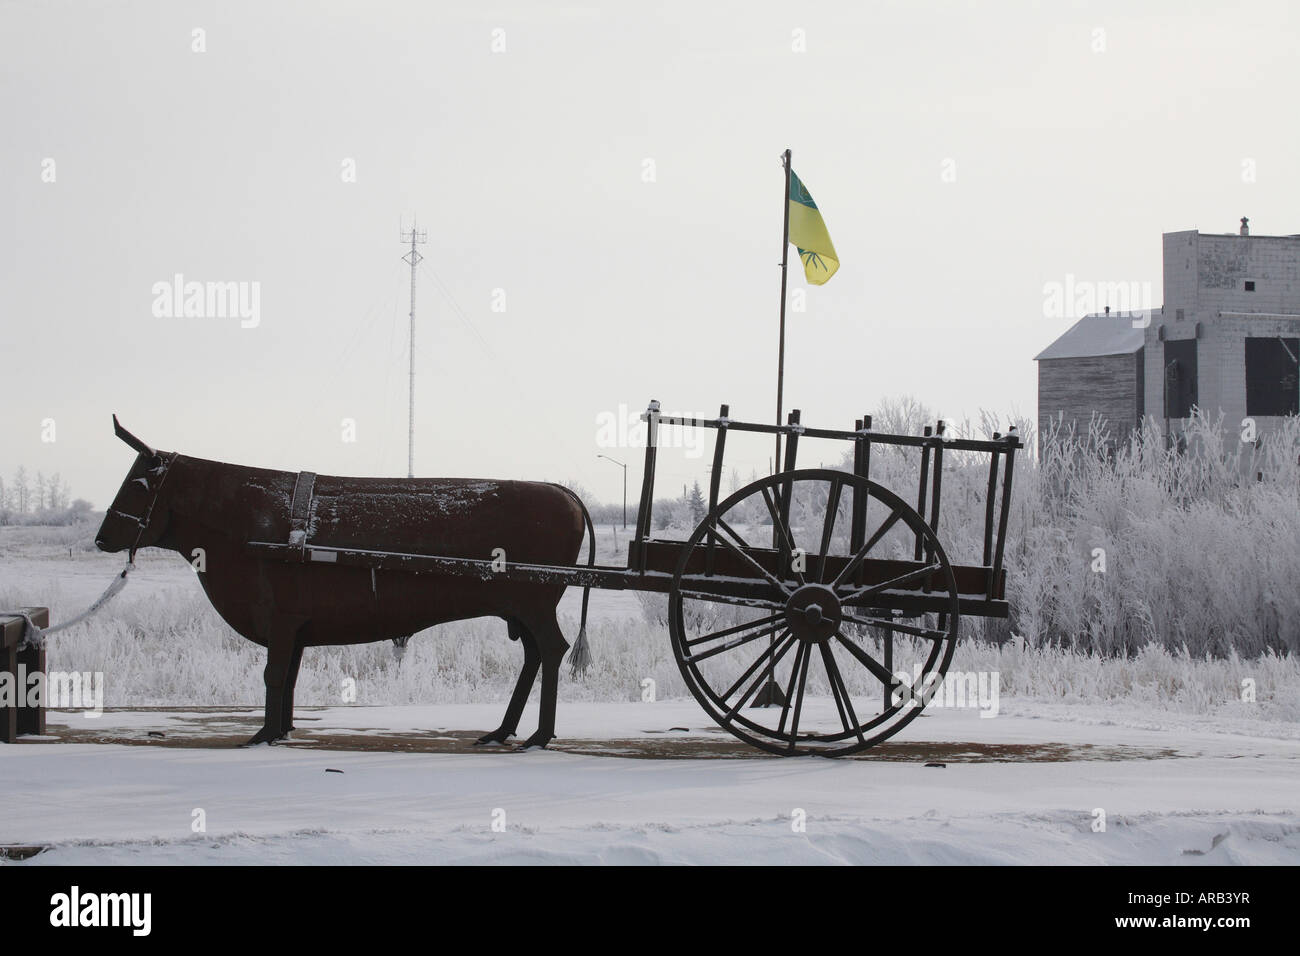 Painet jq5534 ox red river cart aylesbury fake sask flag old elevator statue ornamental snow covered winter frost hoar trees Stock Photo